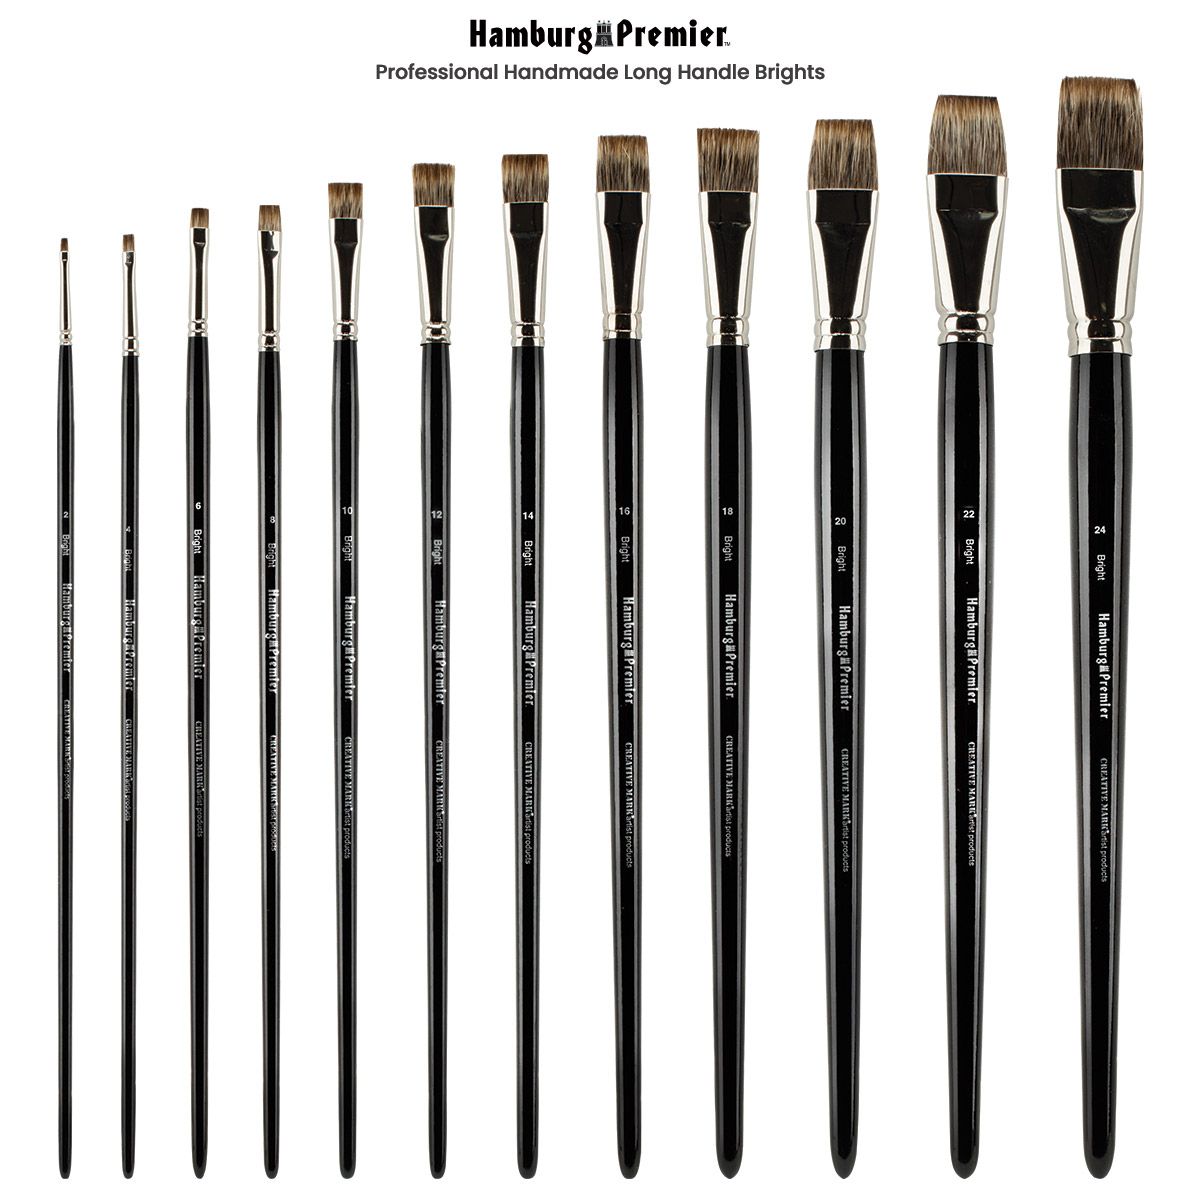 High-quality top of the line brushes